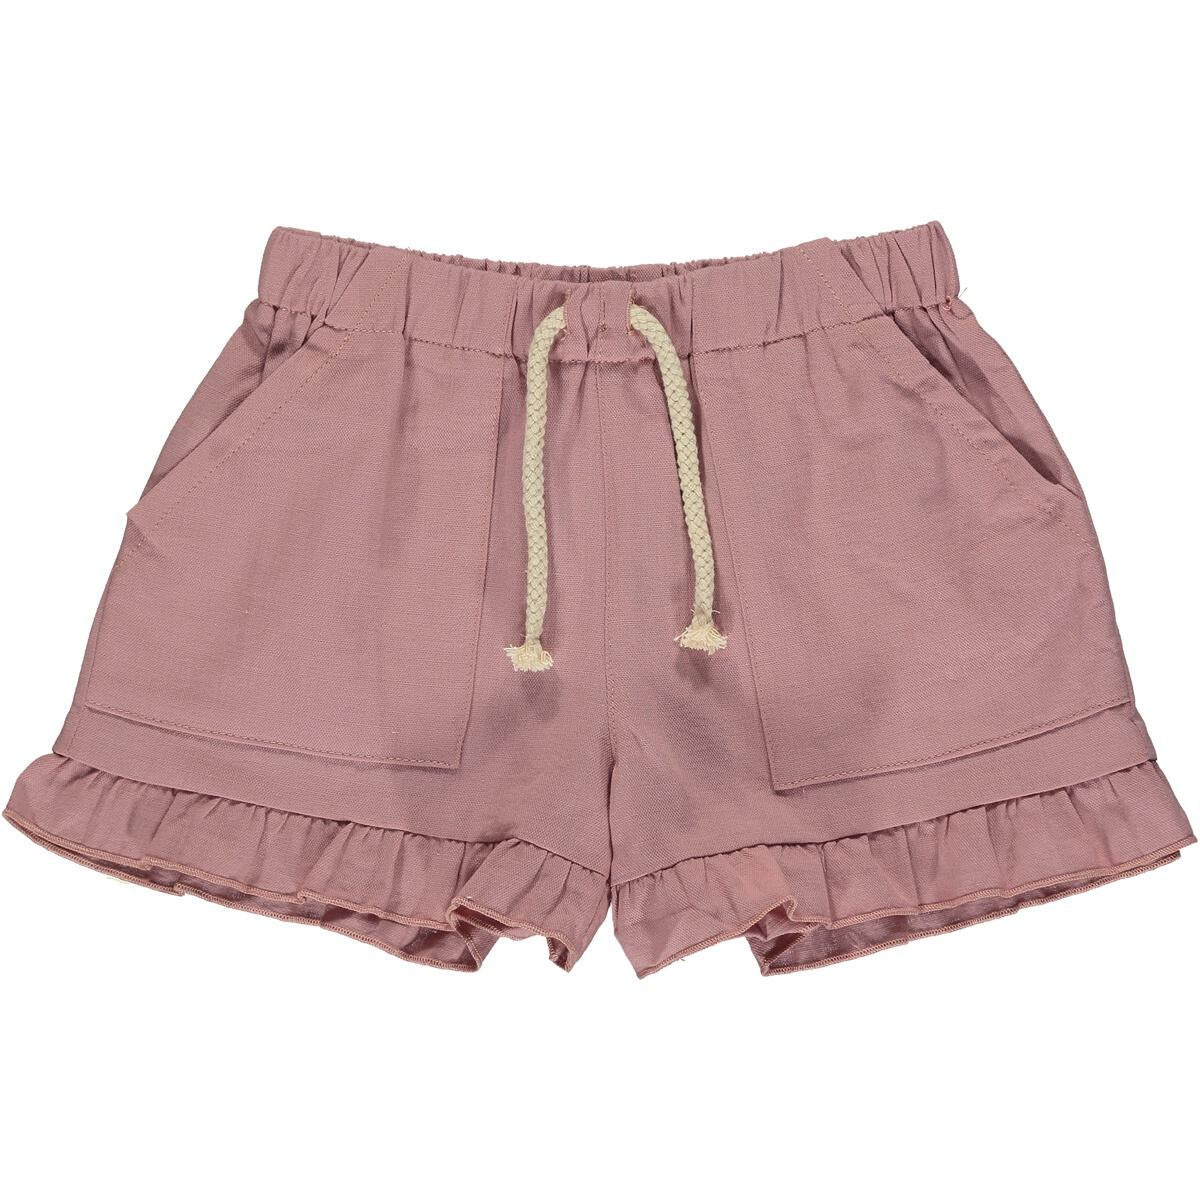 Brynlee Ruffle Shorts- youth